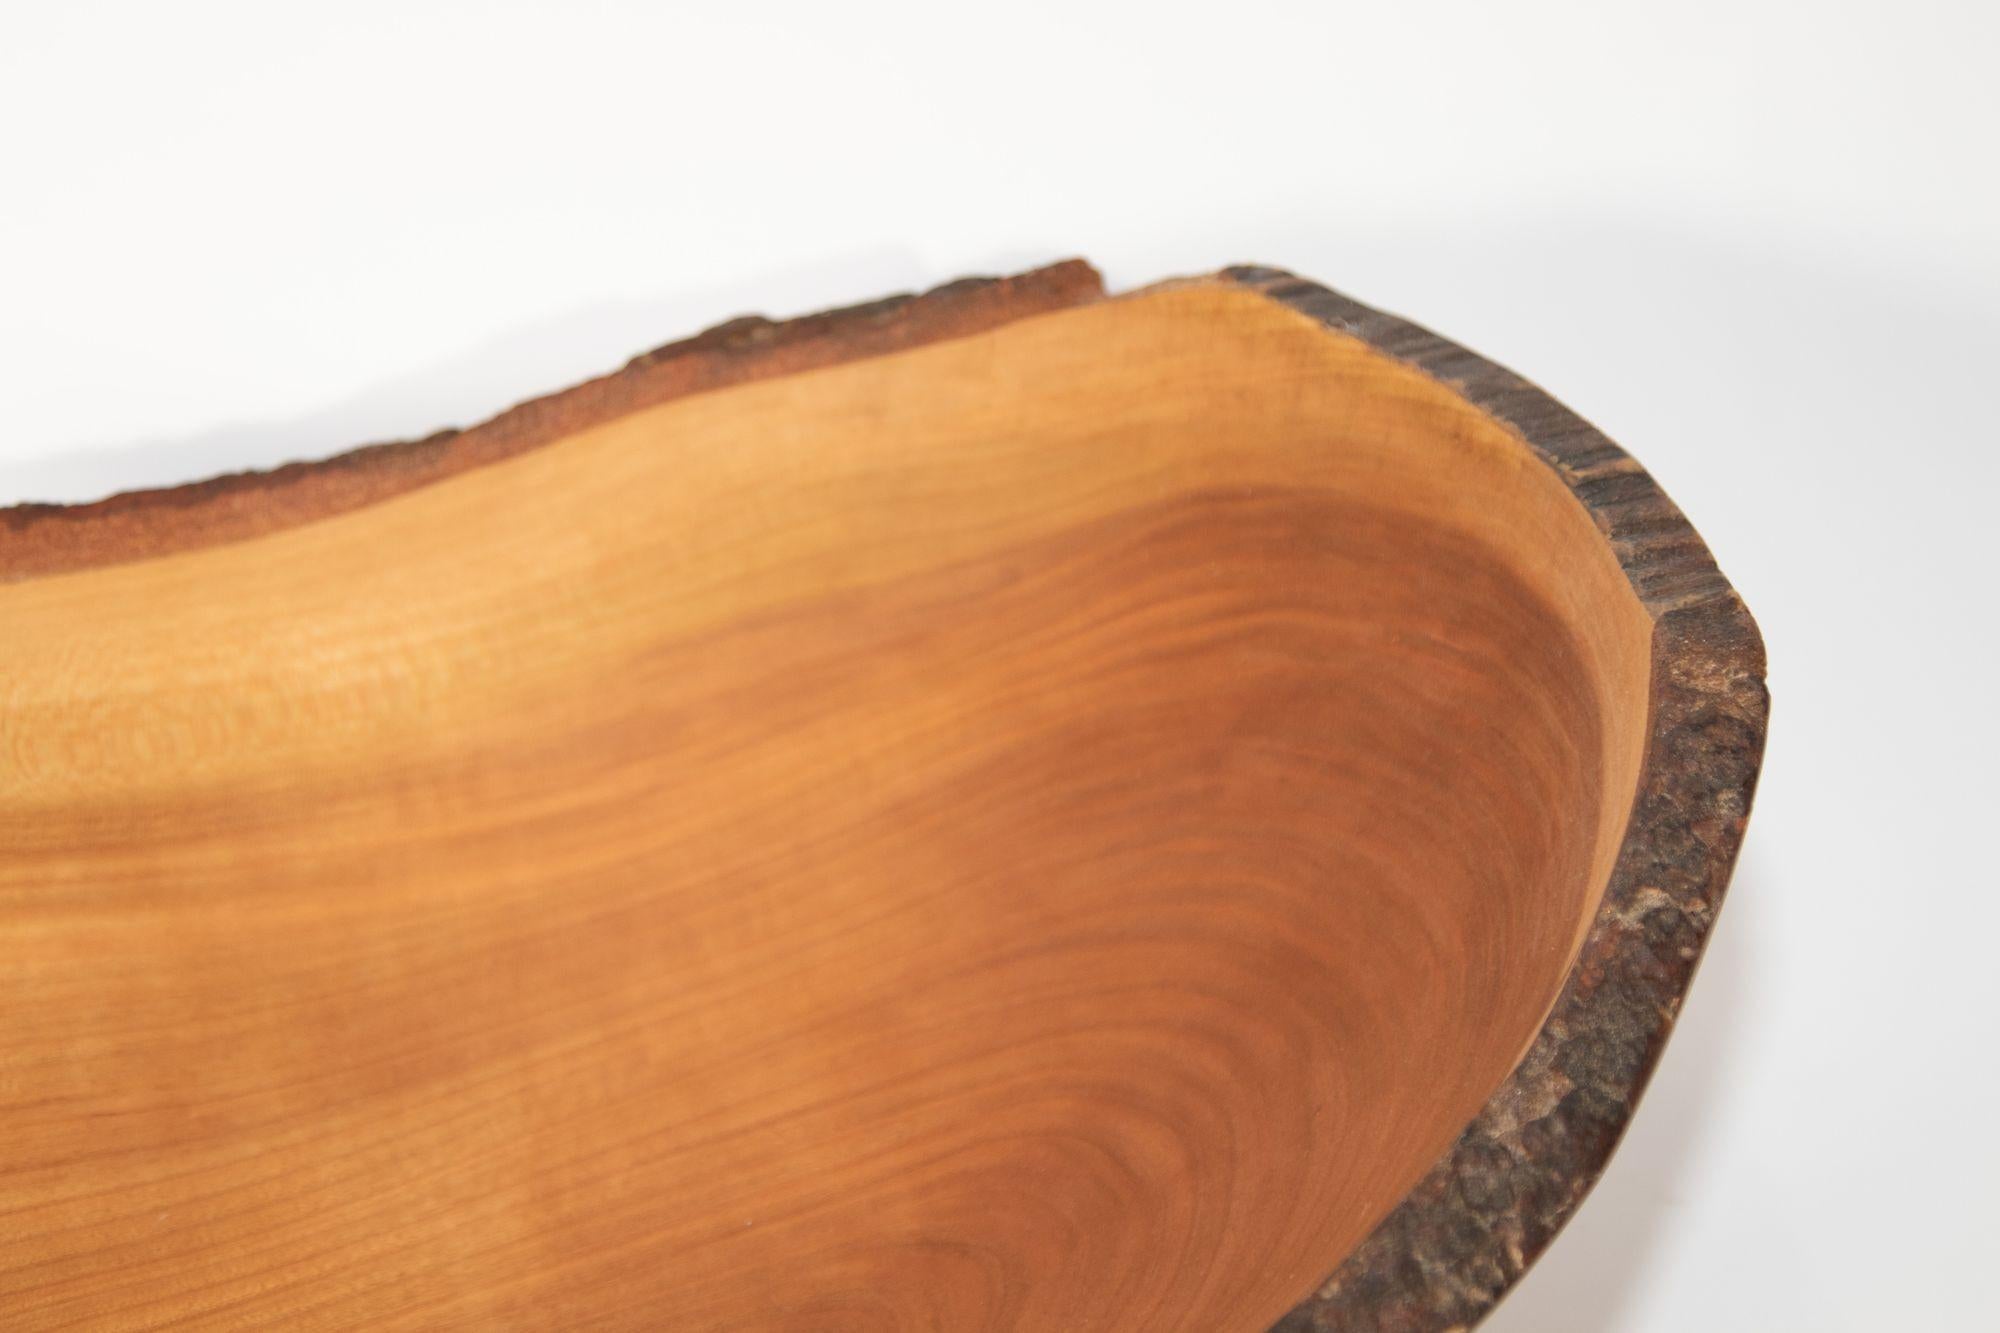 Vintage Spencer Peterson wooden cherry bowl in an oval shape with a natural live edge.

A luxurious hardwood with a satin grain and rich warm color, cherry wood is a symbol of spring, love and renewal. 
This bowl is sustainably sourced and up